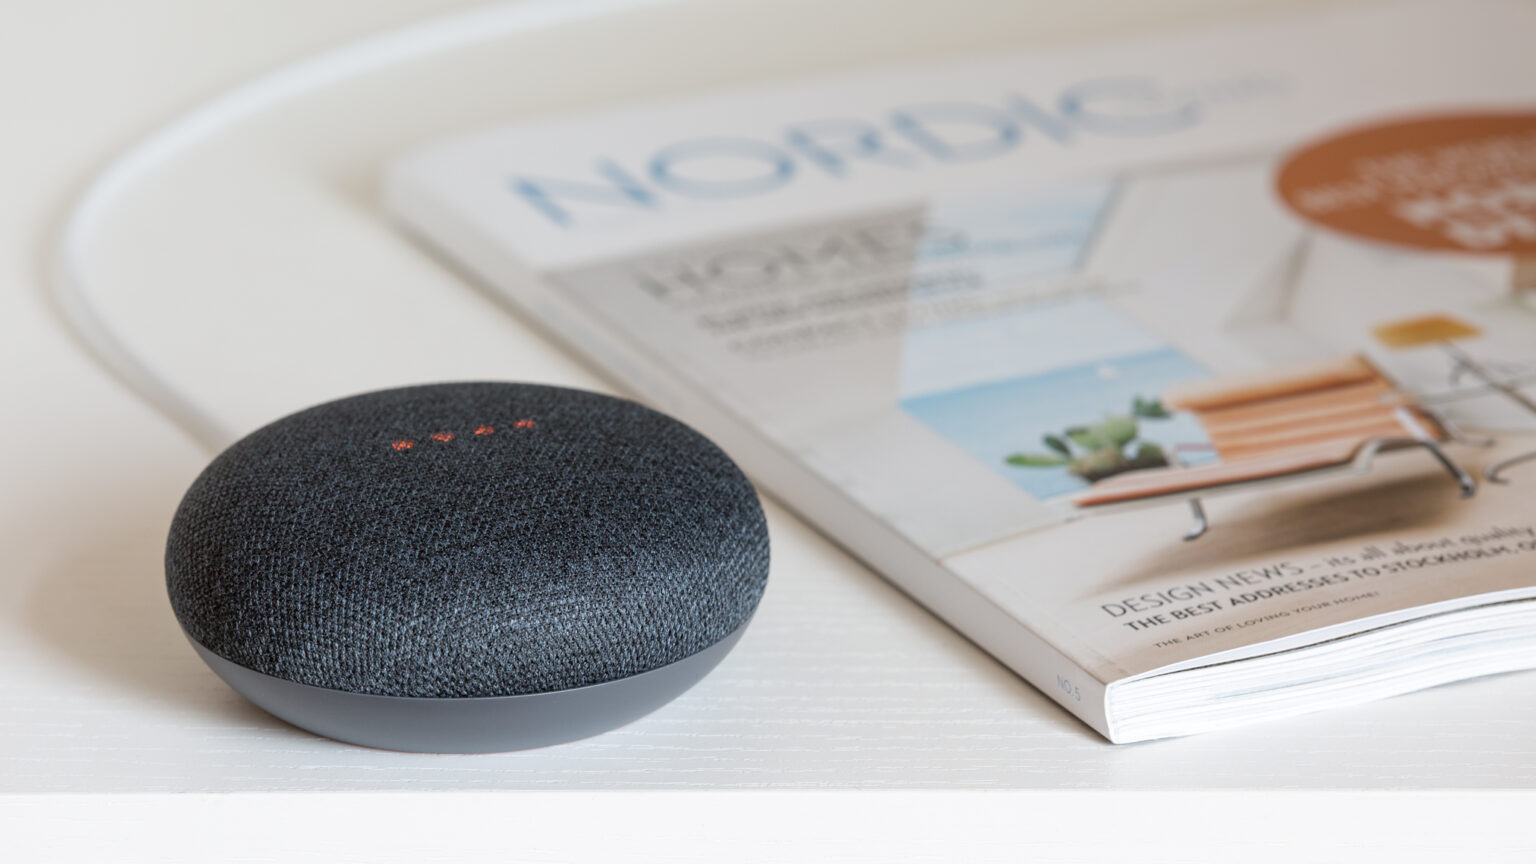 The Google Home Mini speaker offers broad voice activation compatibility with Nest and Works with Nest products. Image: Digitized House Media.